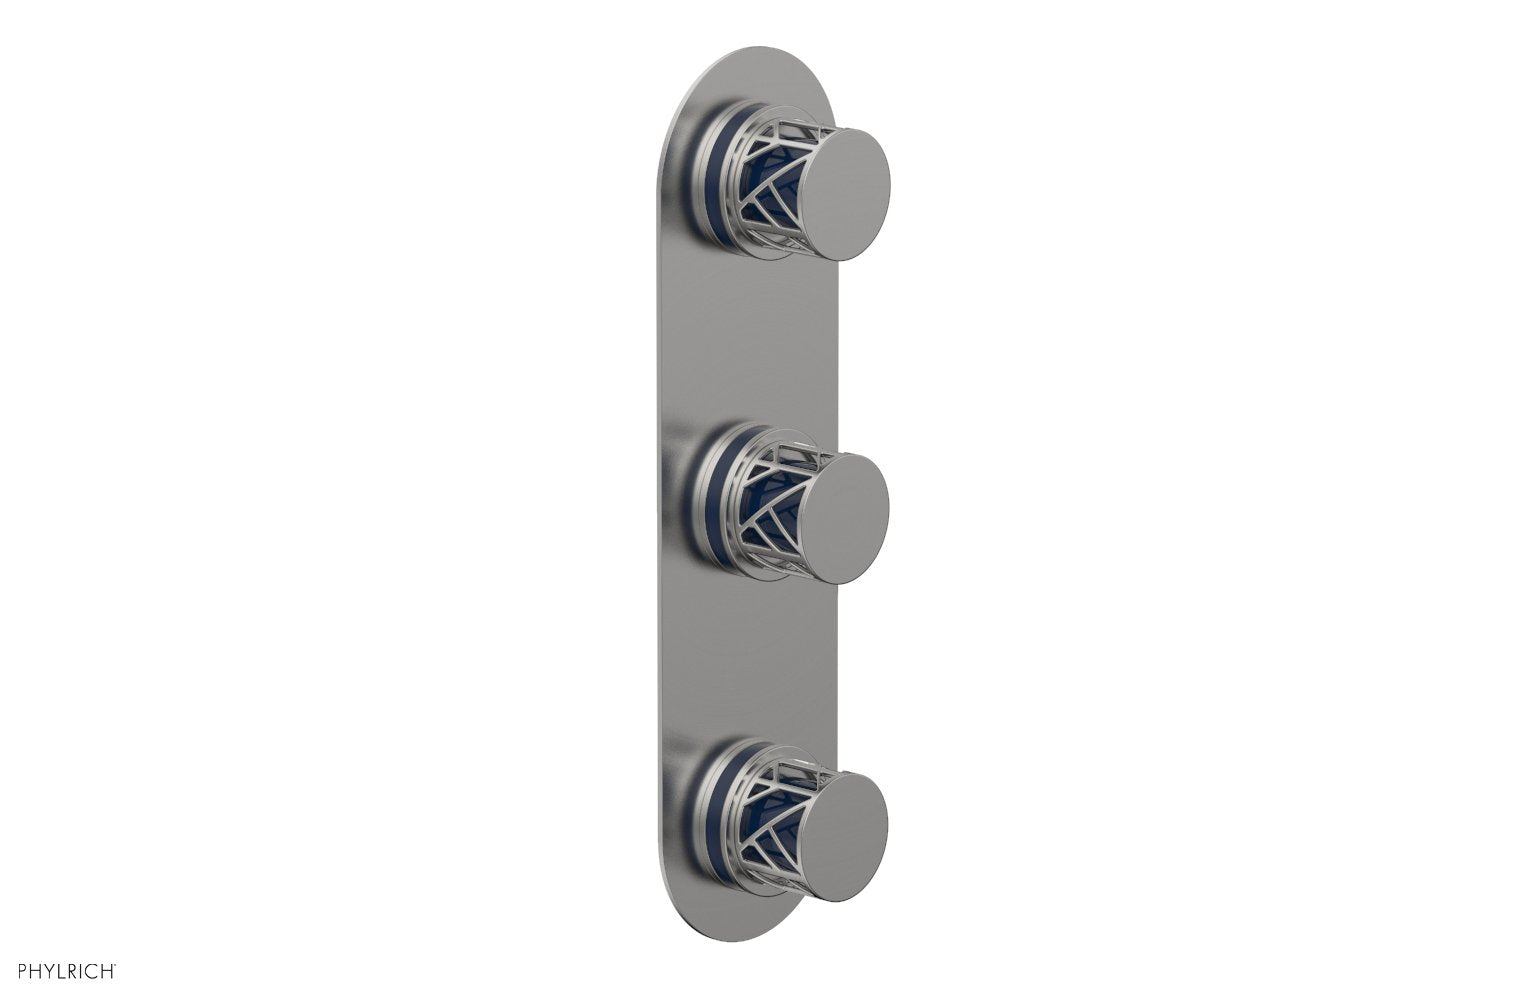 Phylrich JOLIE Thermostatic Valve with Two Volume Control with "Navy Blue" Accents